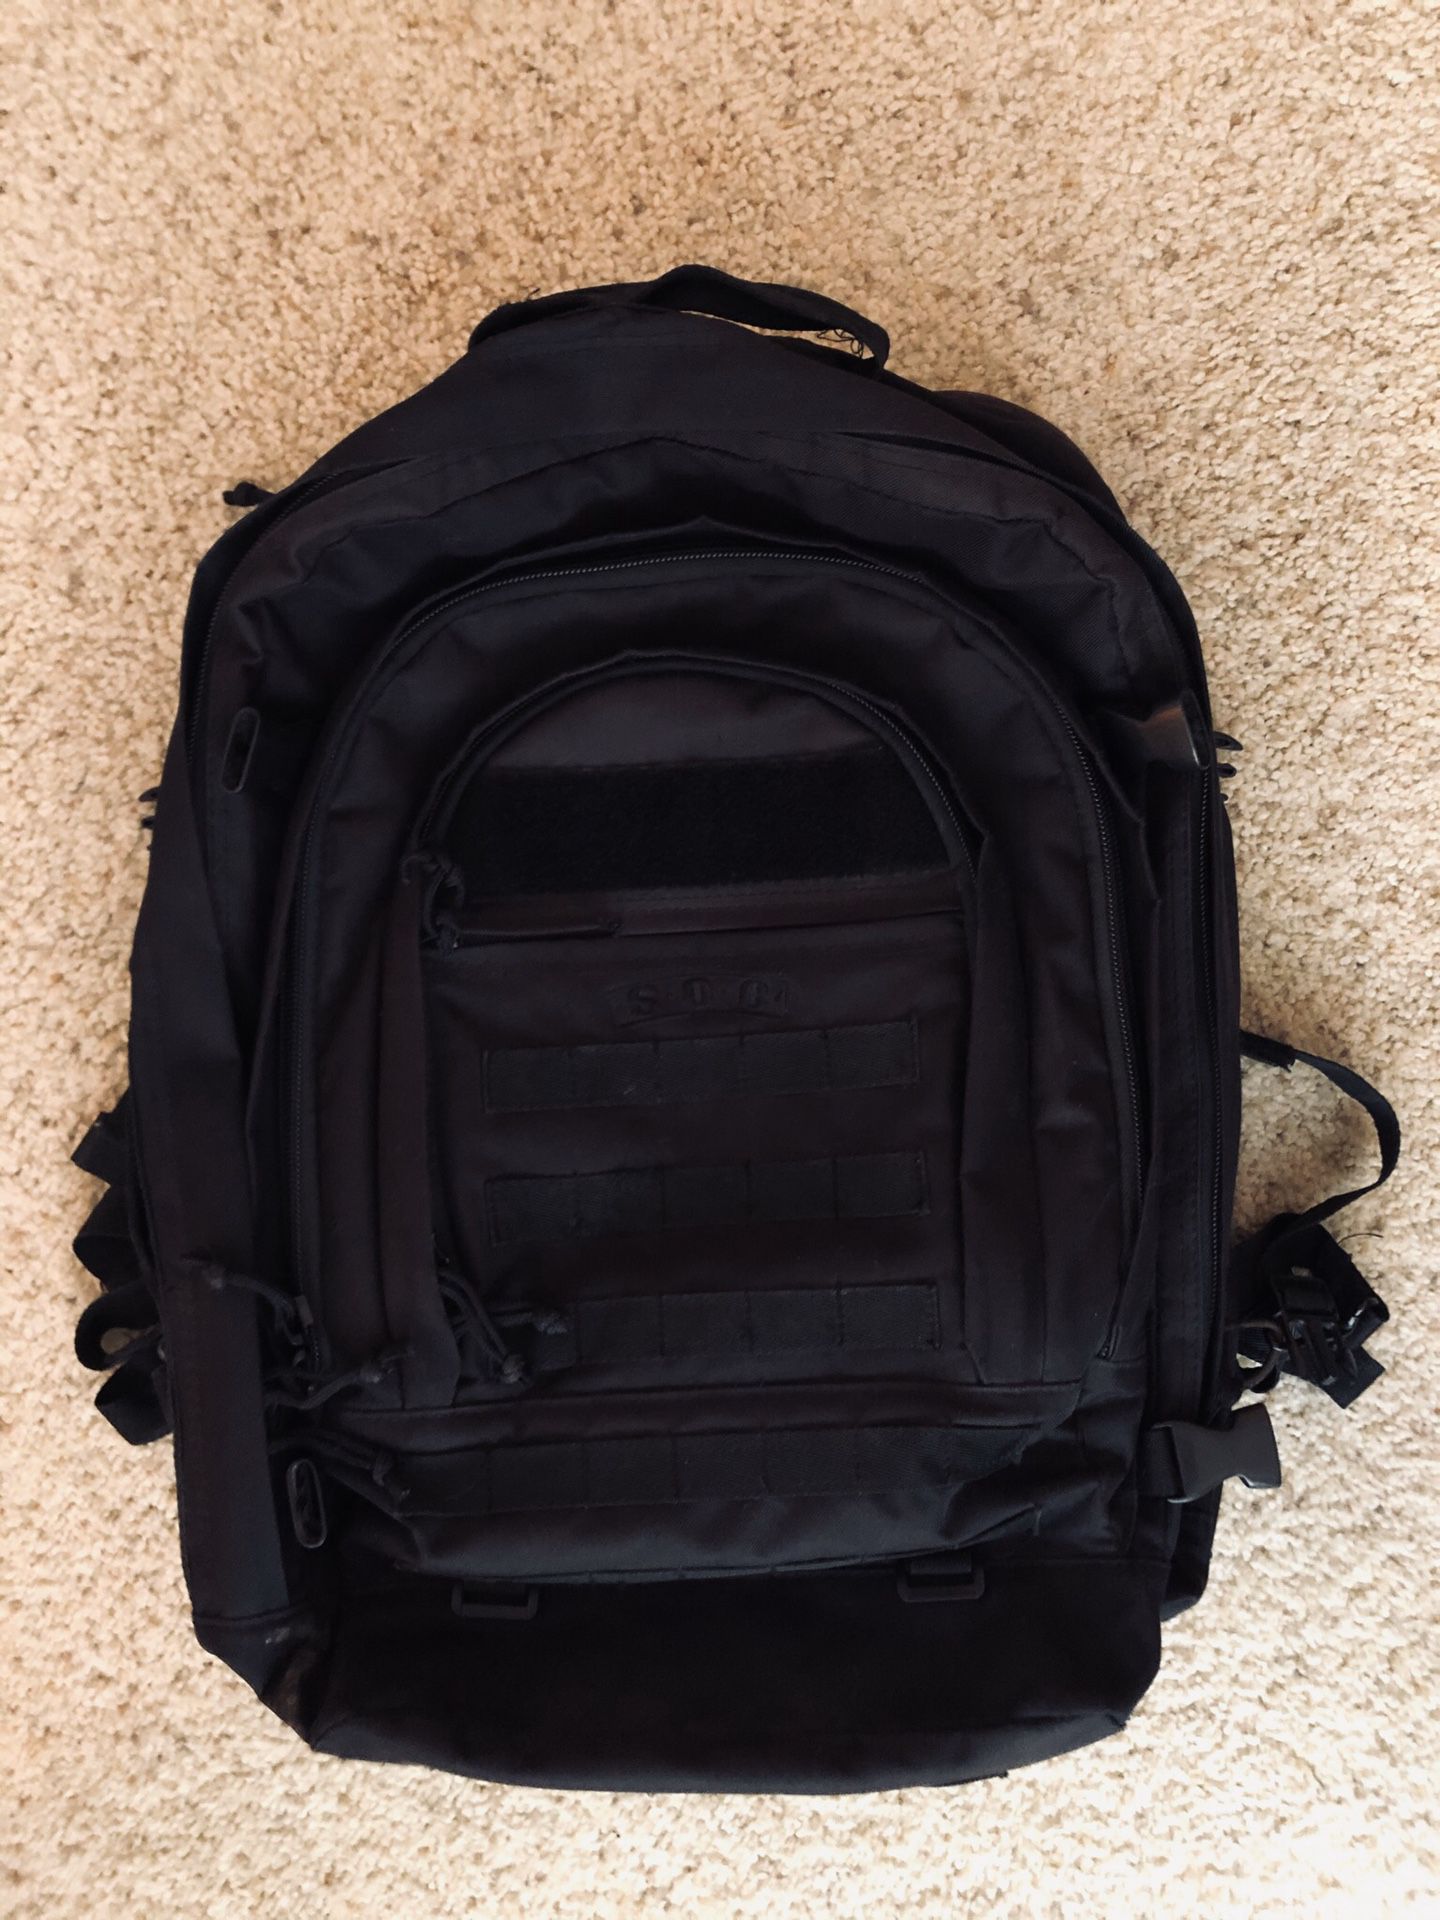 S.O.C. Tactical Backpack